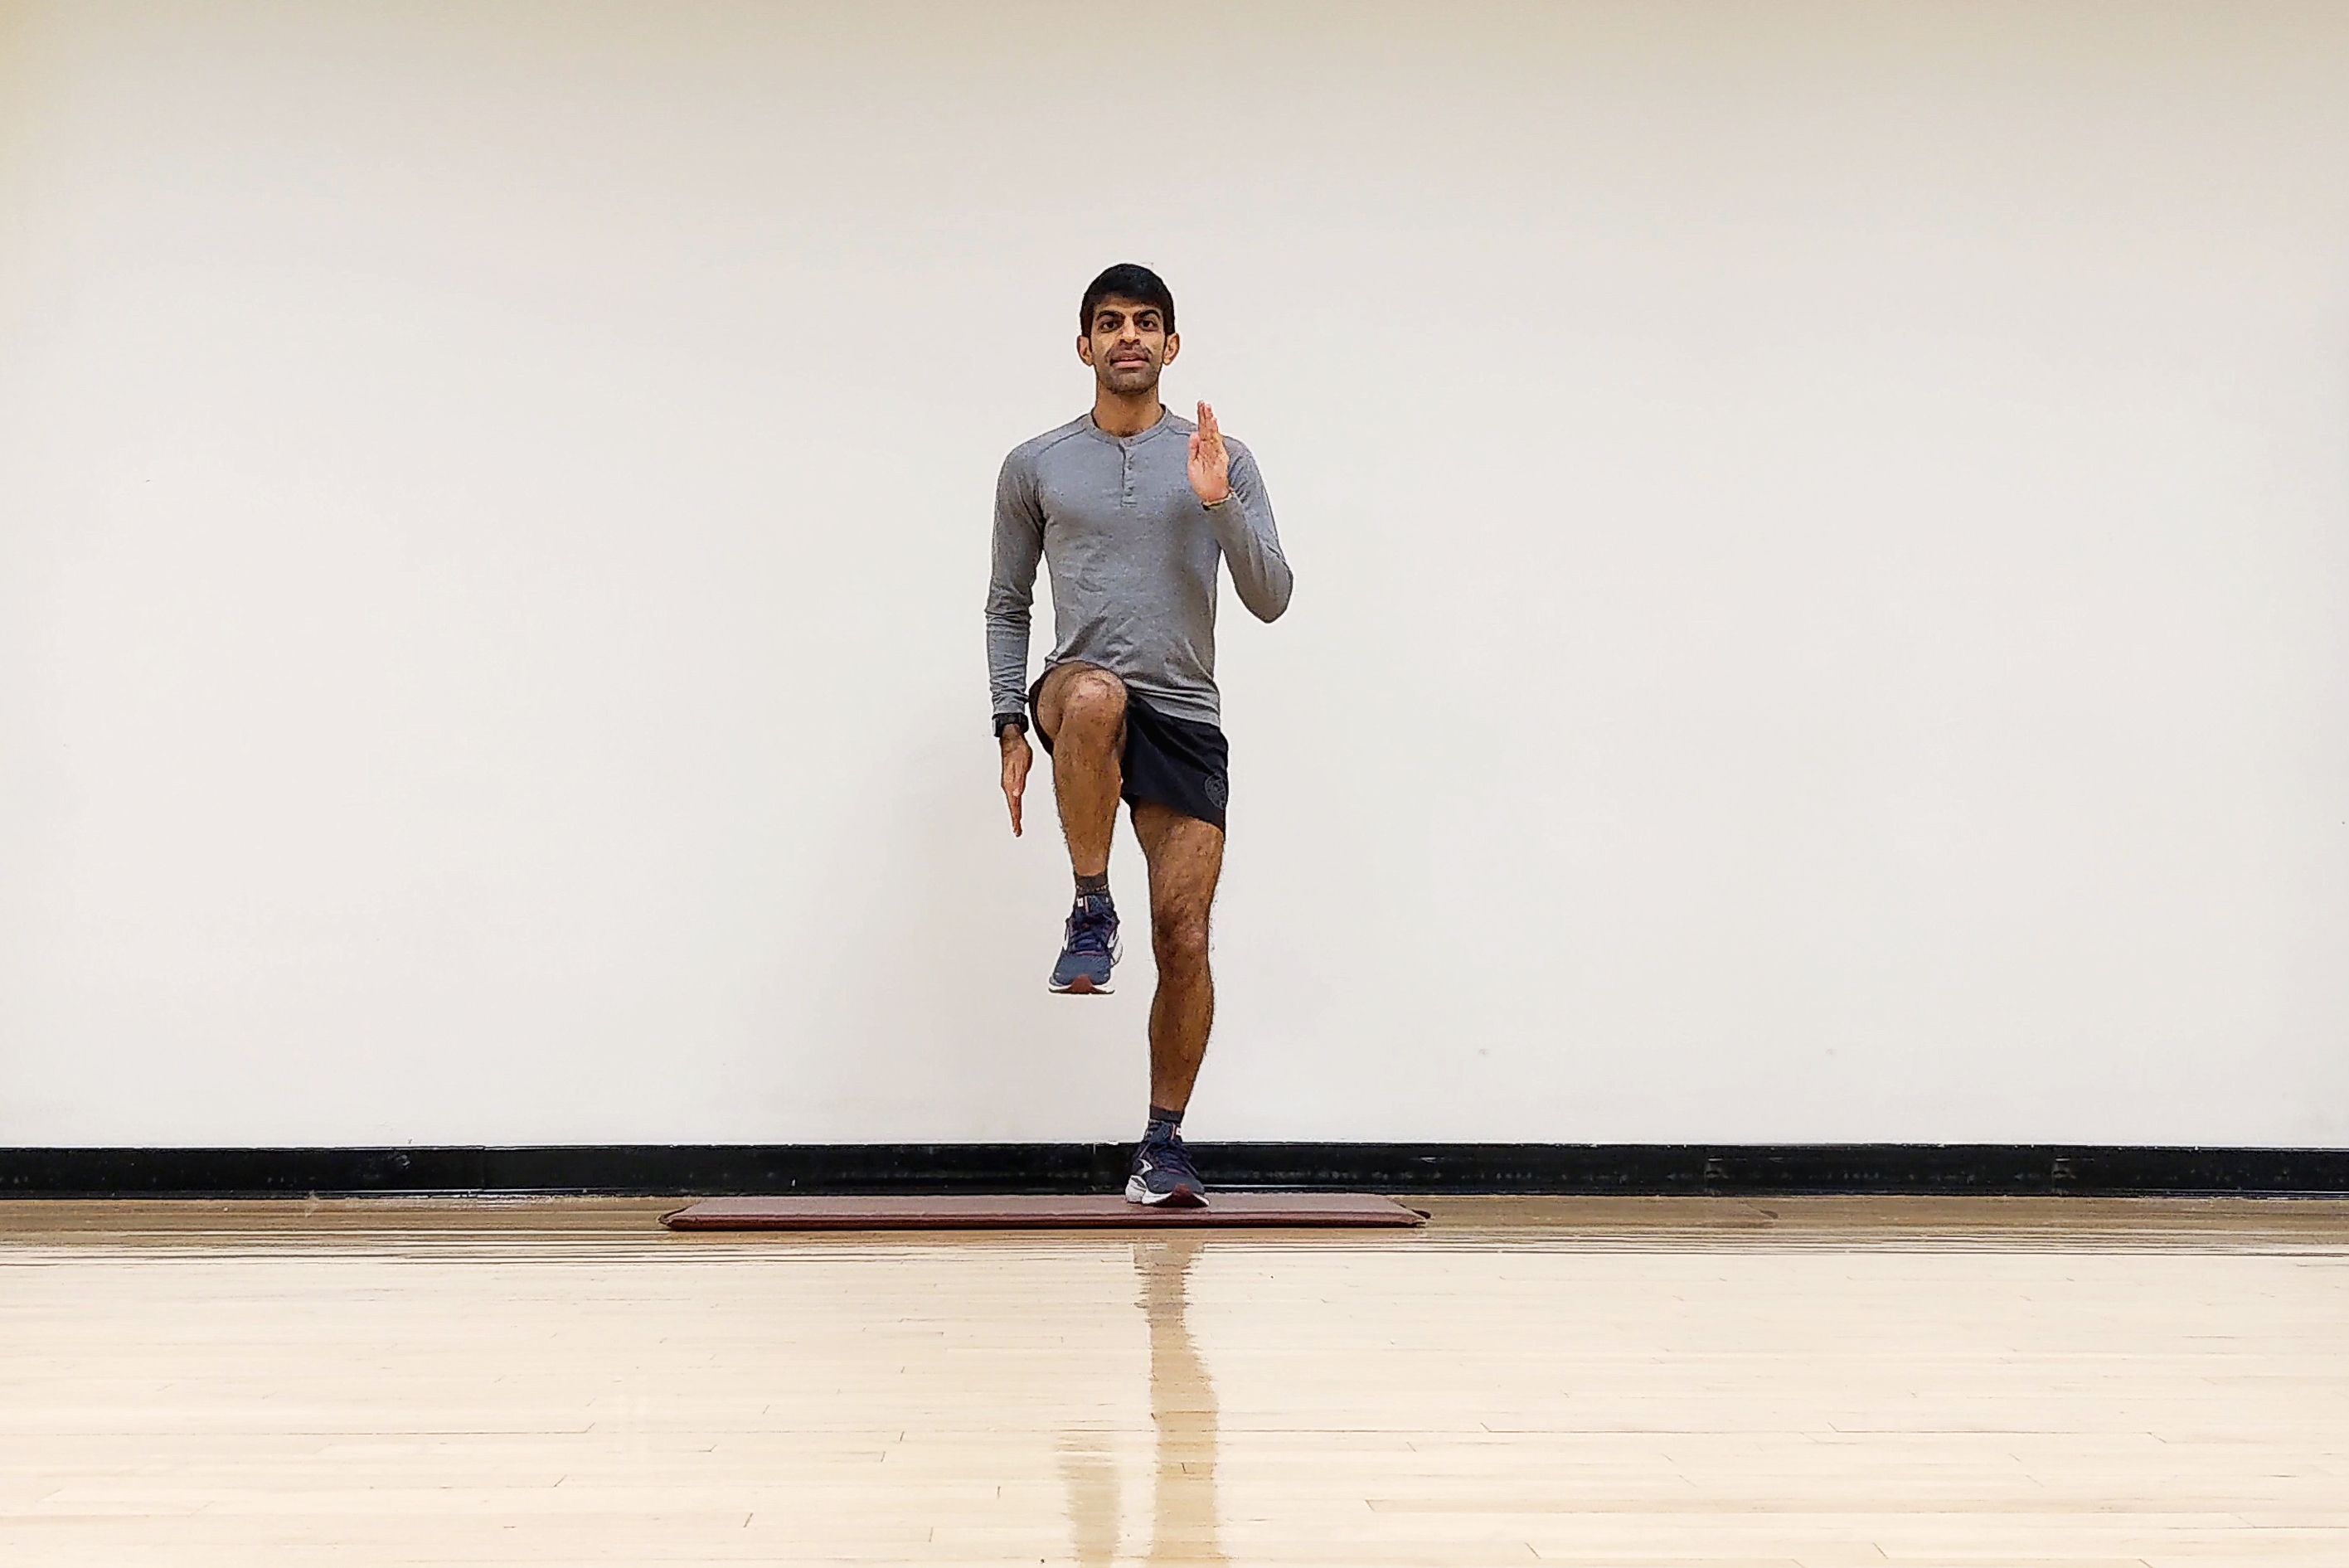 11 Single-Leg Exercises to Build Strength and Balance—And Work Your Abs Too